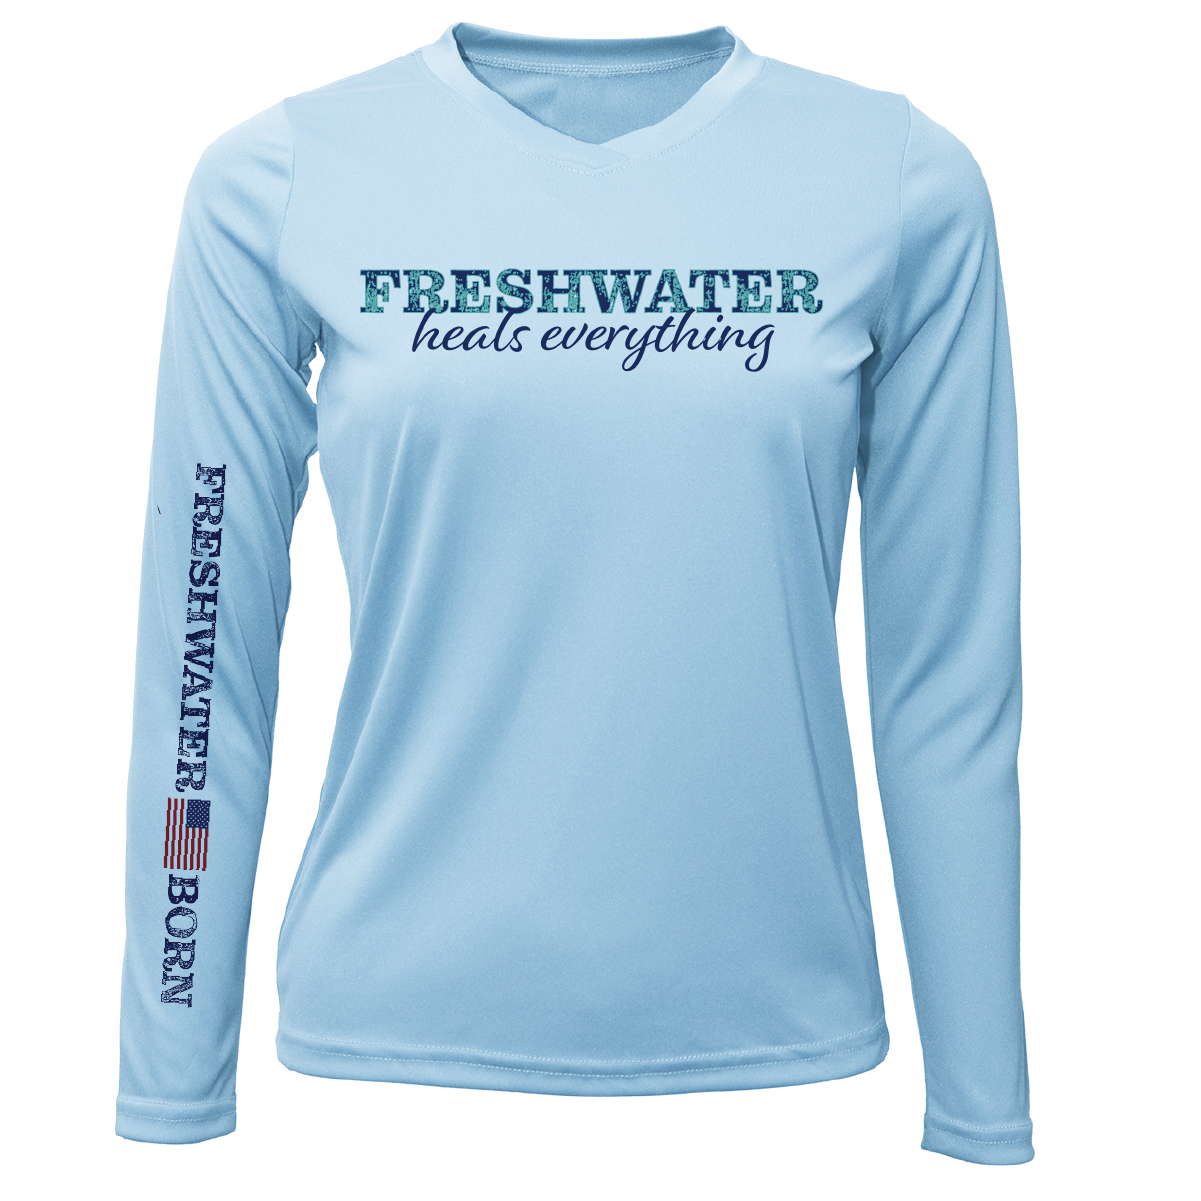 Texas "Freshwater Heals Everything" Women's Long Sleeve UPF 50+ Dry-Fit Shirt